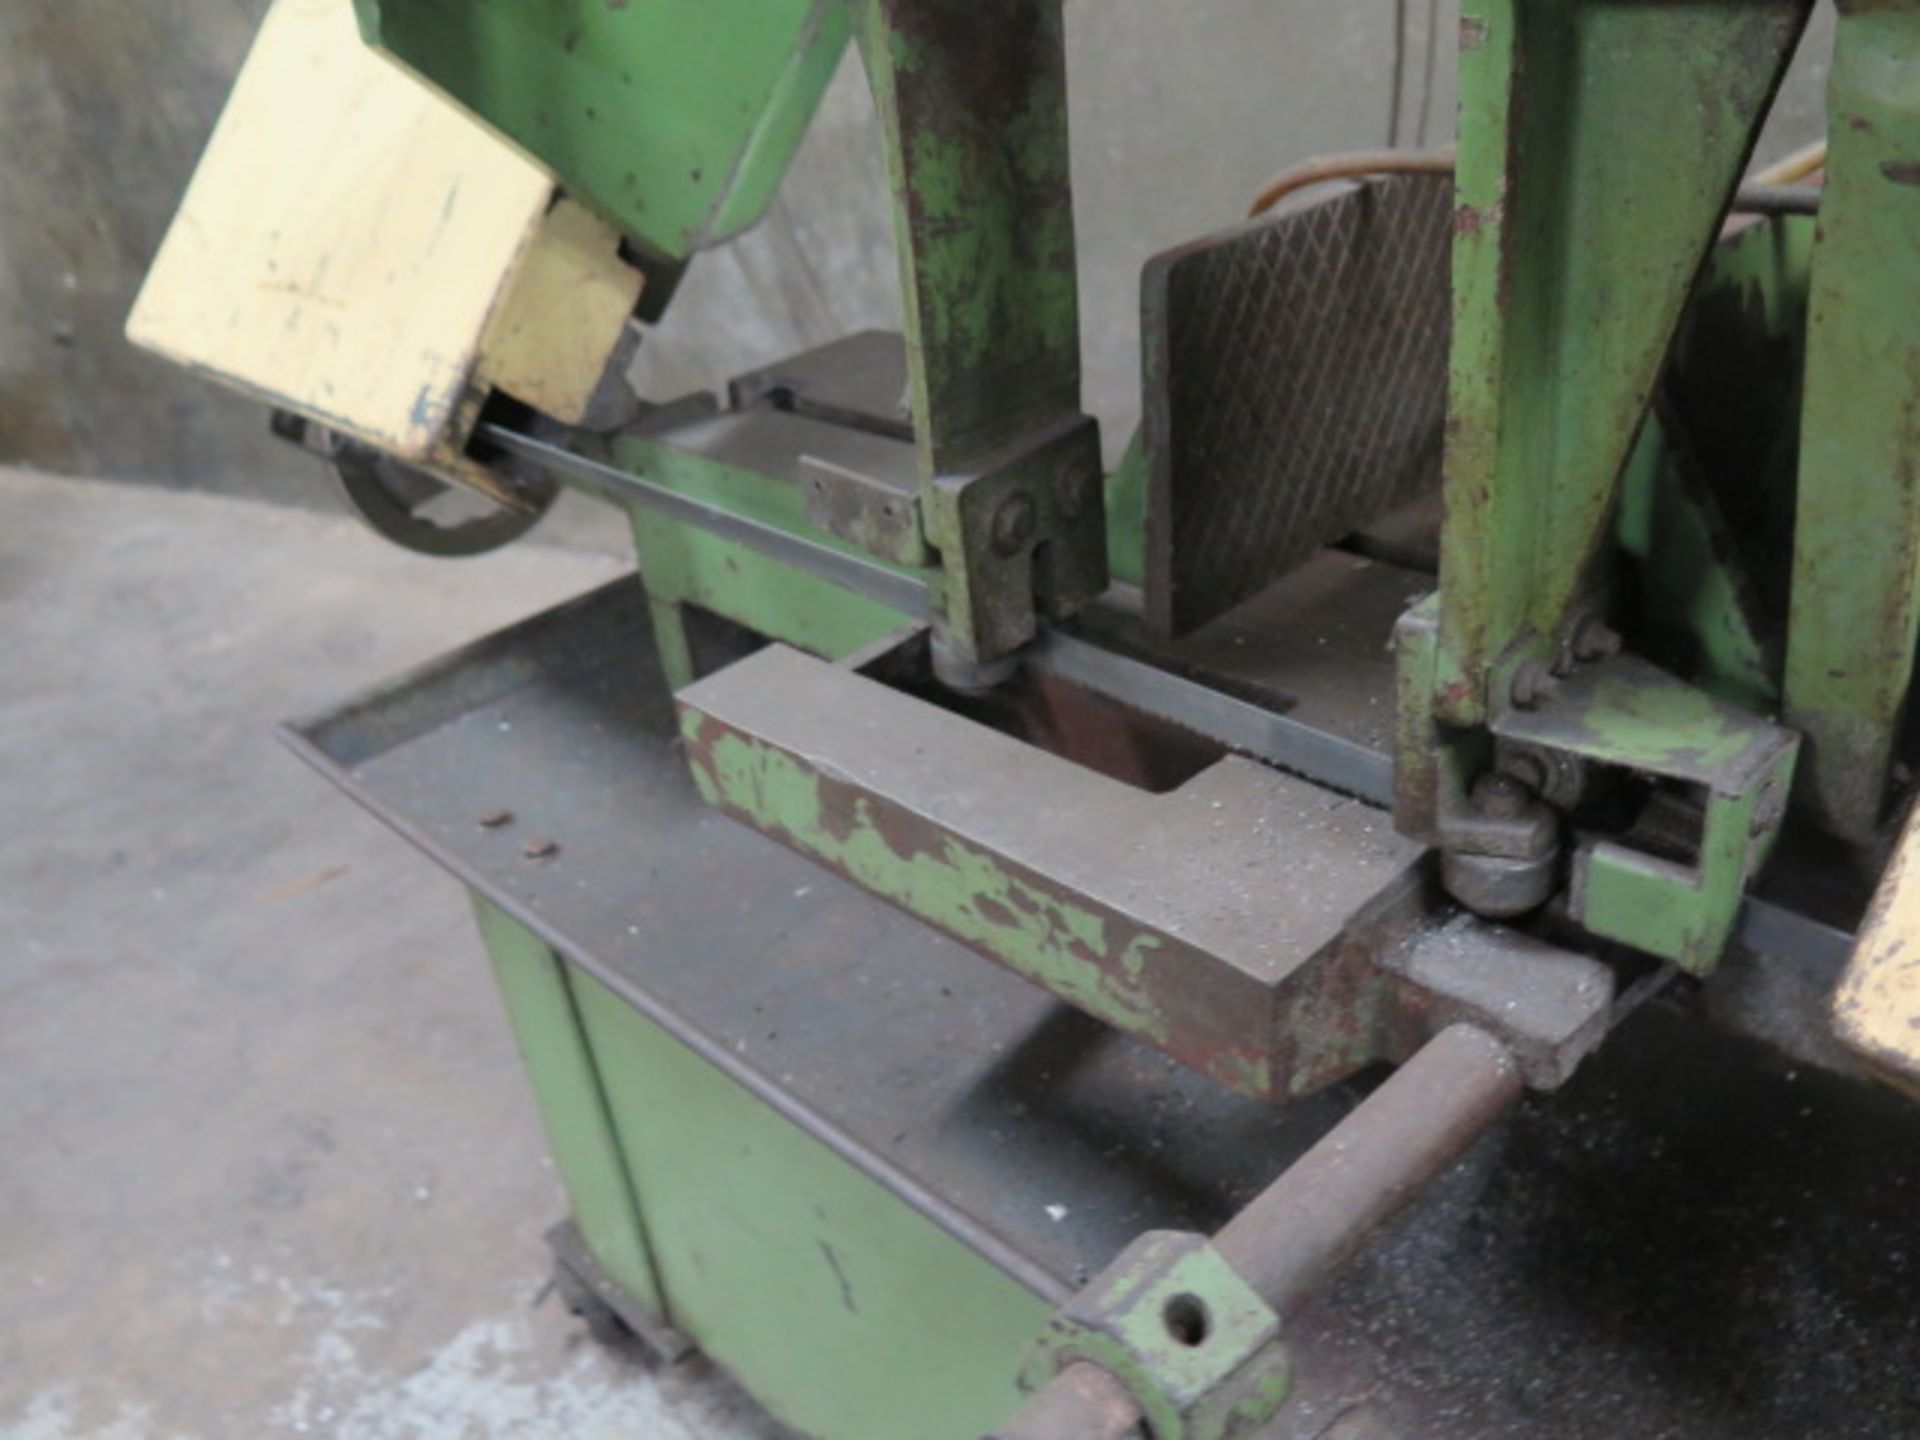 Import mdl. 9 9” Horizontal Band Saw (SOLD AS-IS - NO WARRANTY) - Image 4 of 7